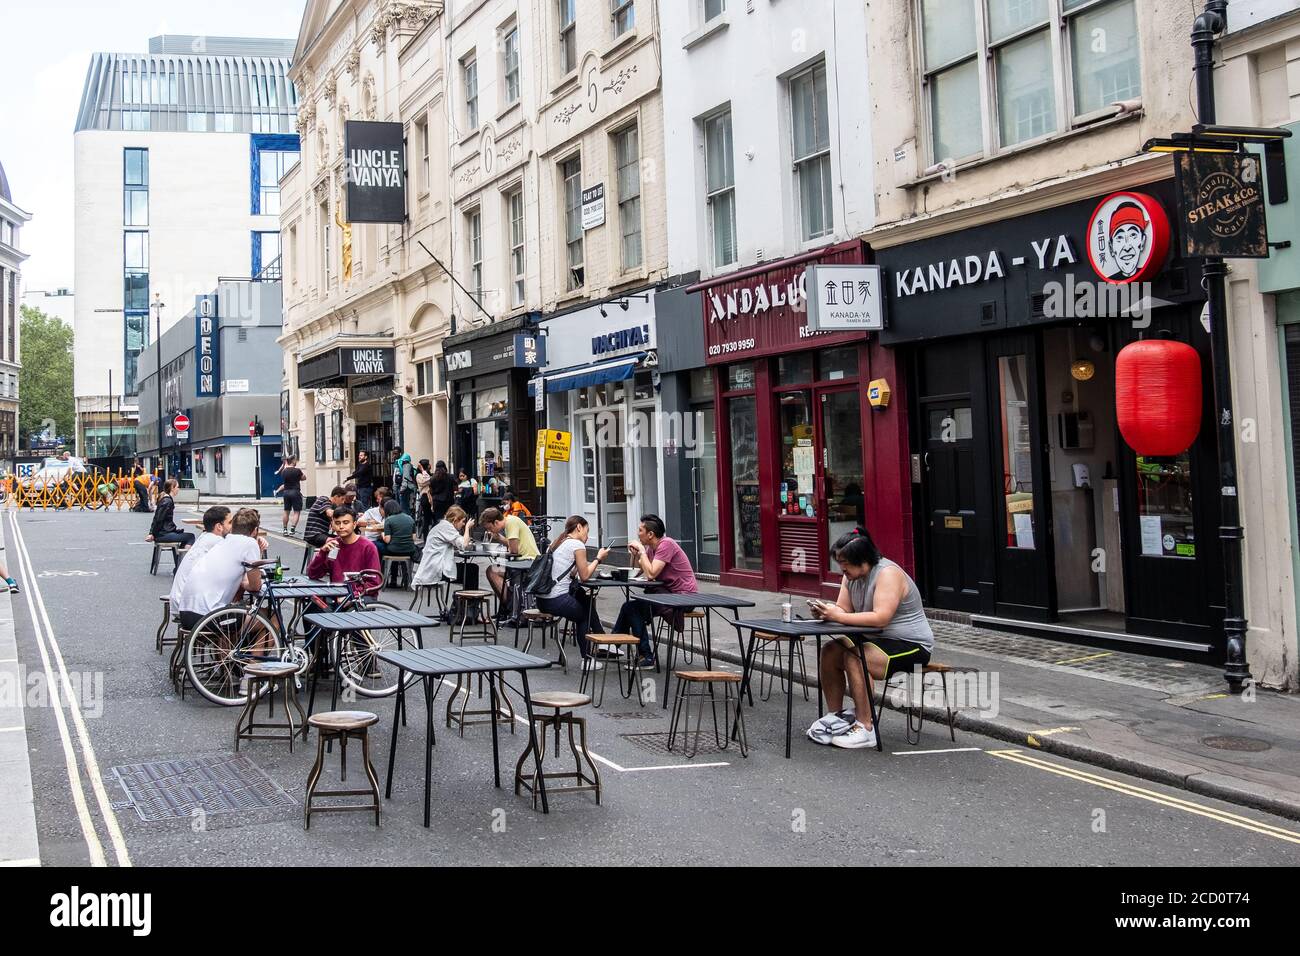 London- August, 2020: Temporary outdoor dining on a street in the West End to allow for social distancing due to the Covid 19 pandemic Stock Photo